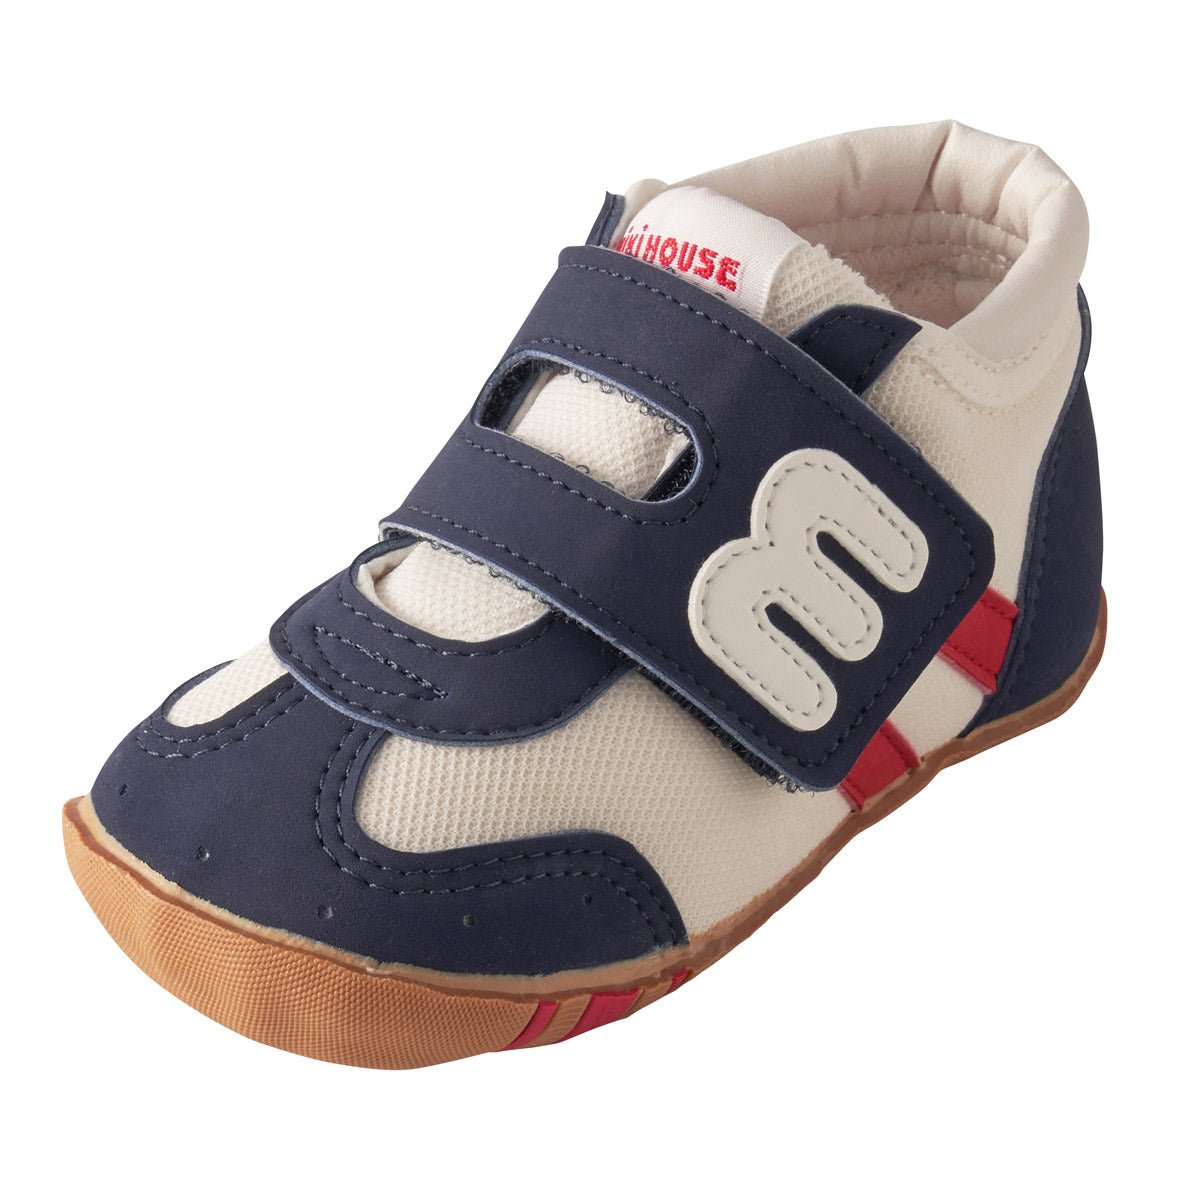 My First Athletic Walker Shoes-"m"Logo - MIKI HOUSE USA